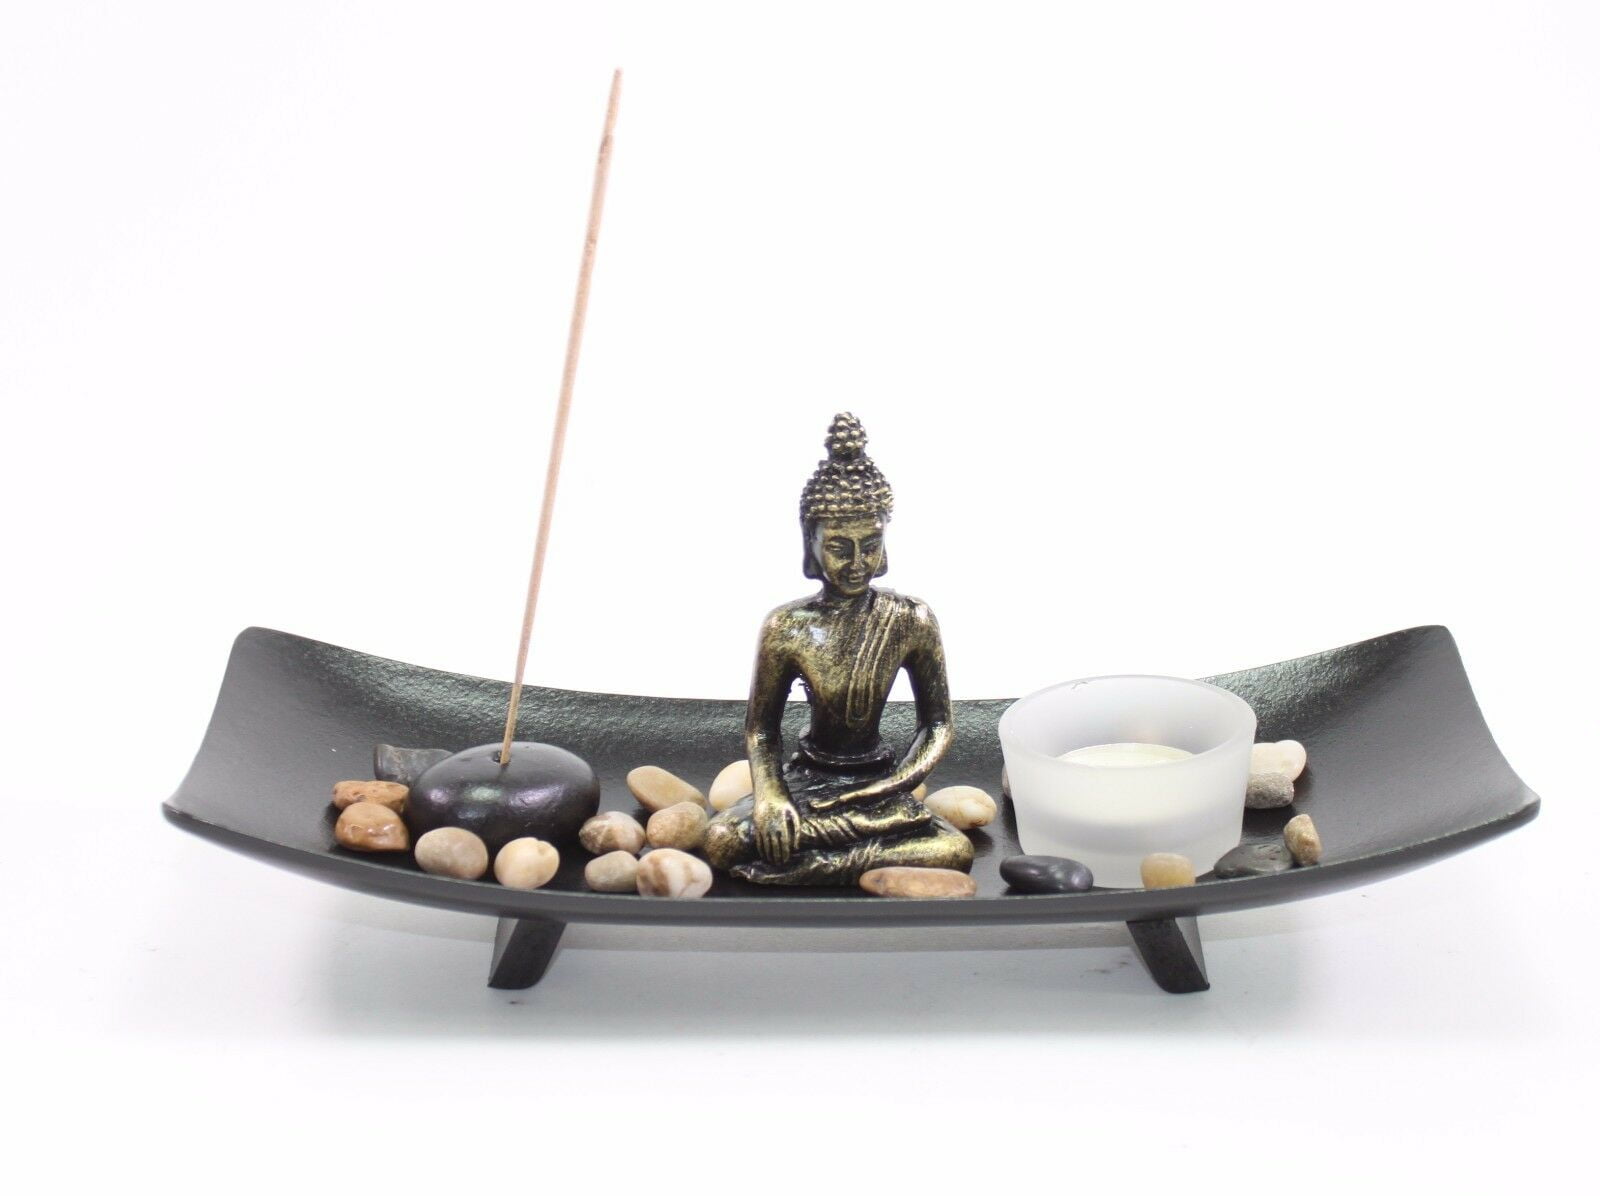 Tealight Candle Holder and River Rocks Peace and Tranquility for Home Decor Gift Chris.W Buddha Statue Tabletop Zen Garden Kit with Incense Burner